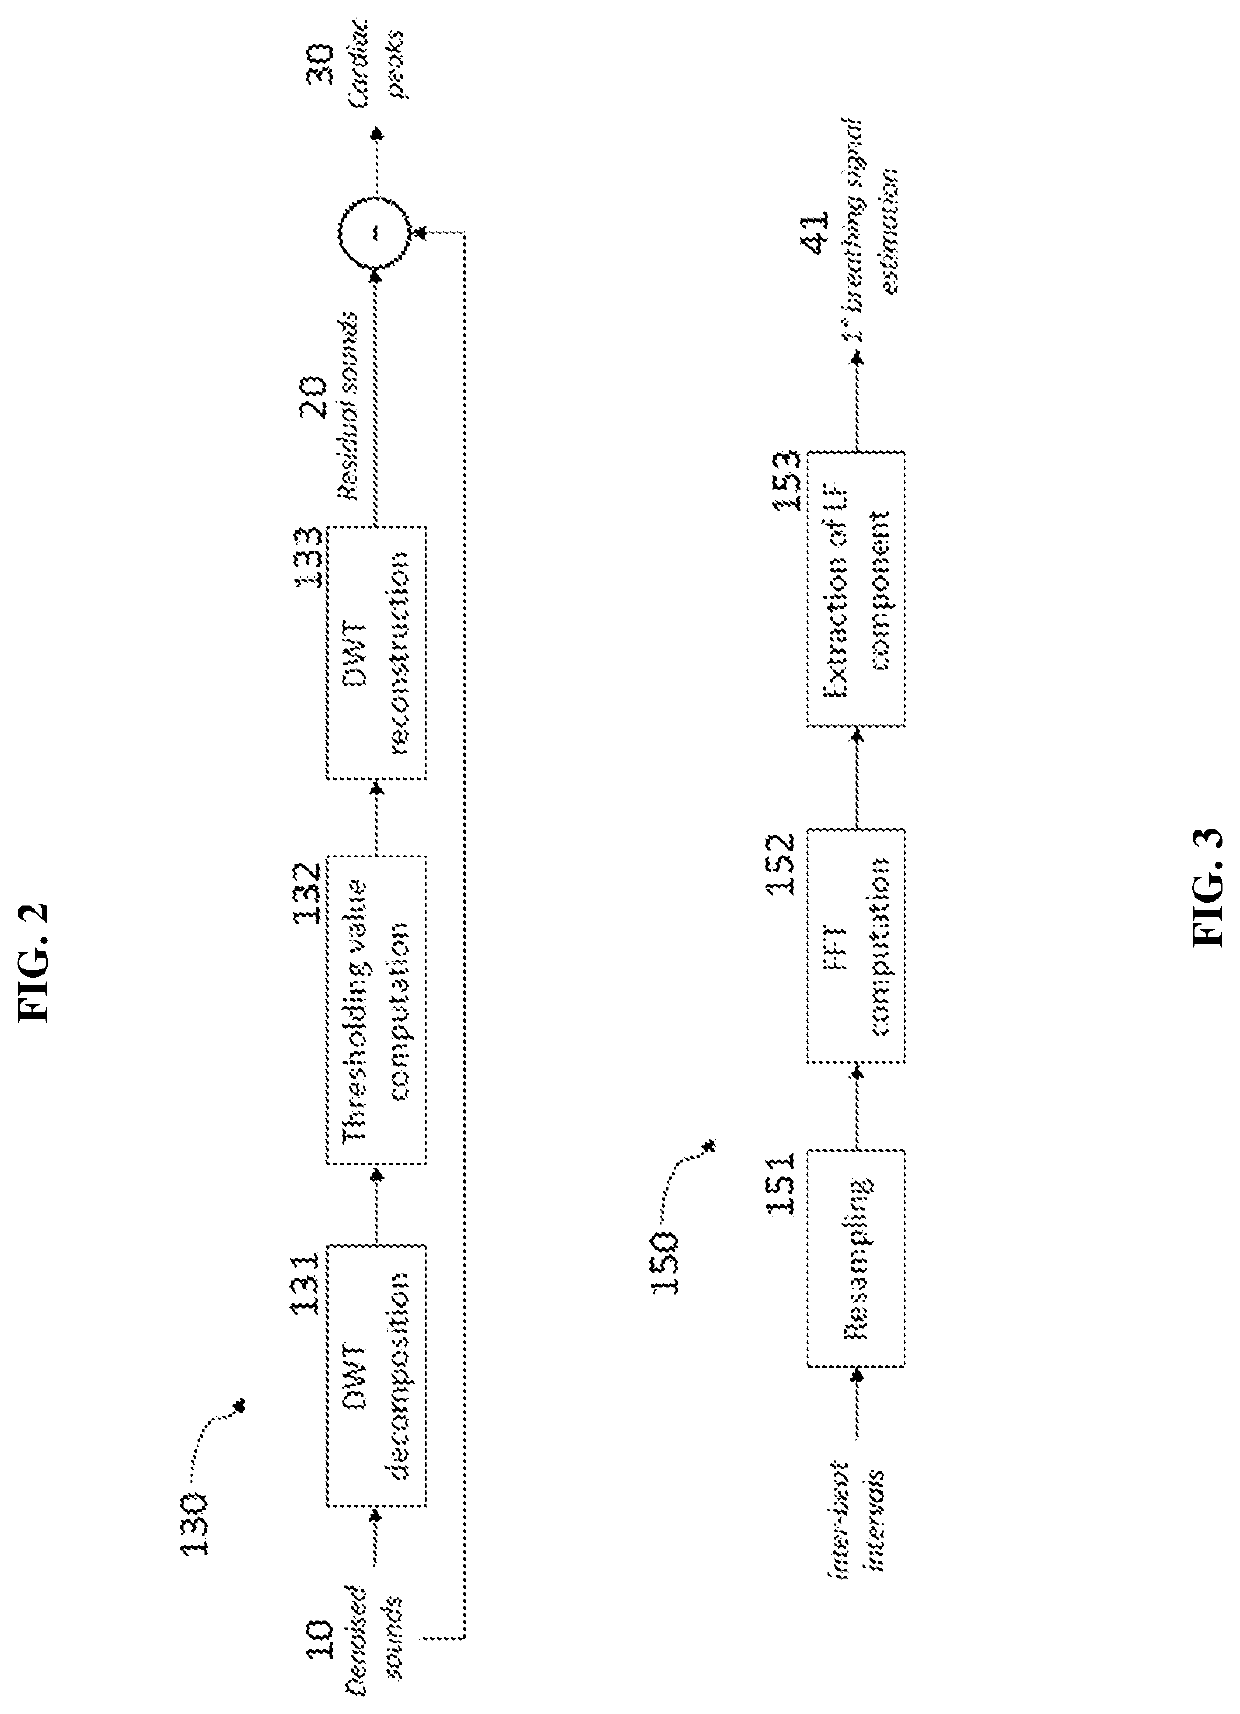 Method and system for monitoring physiological signals